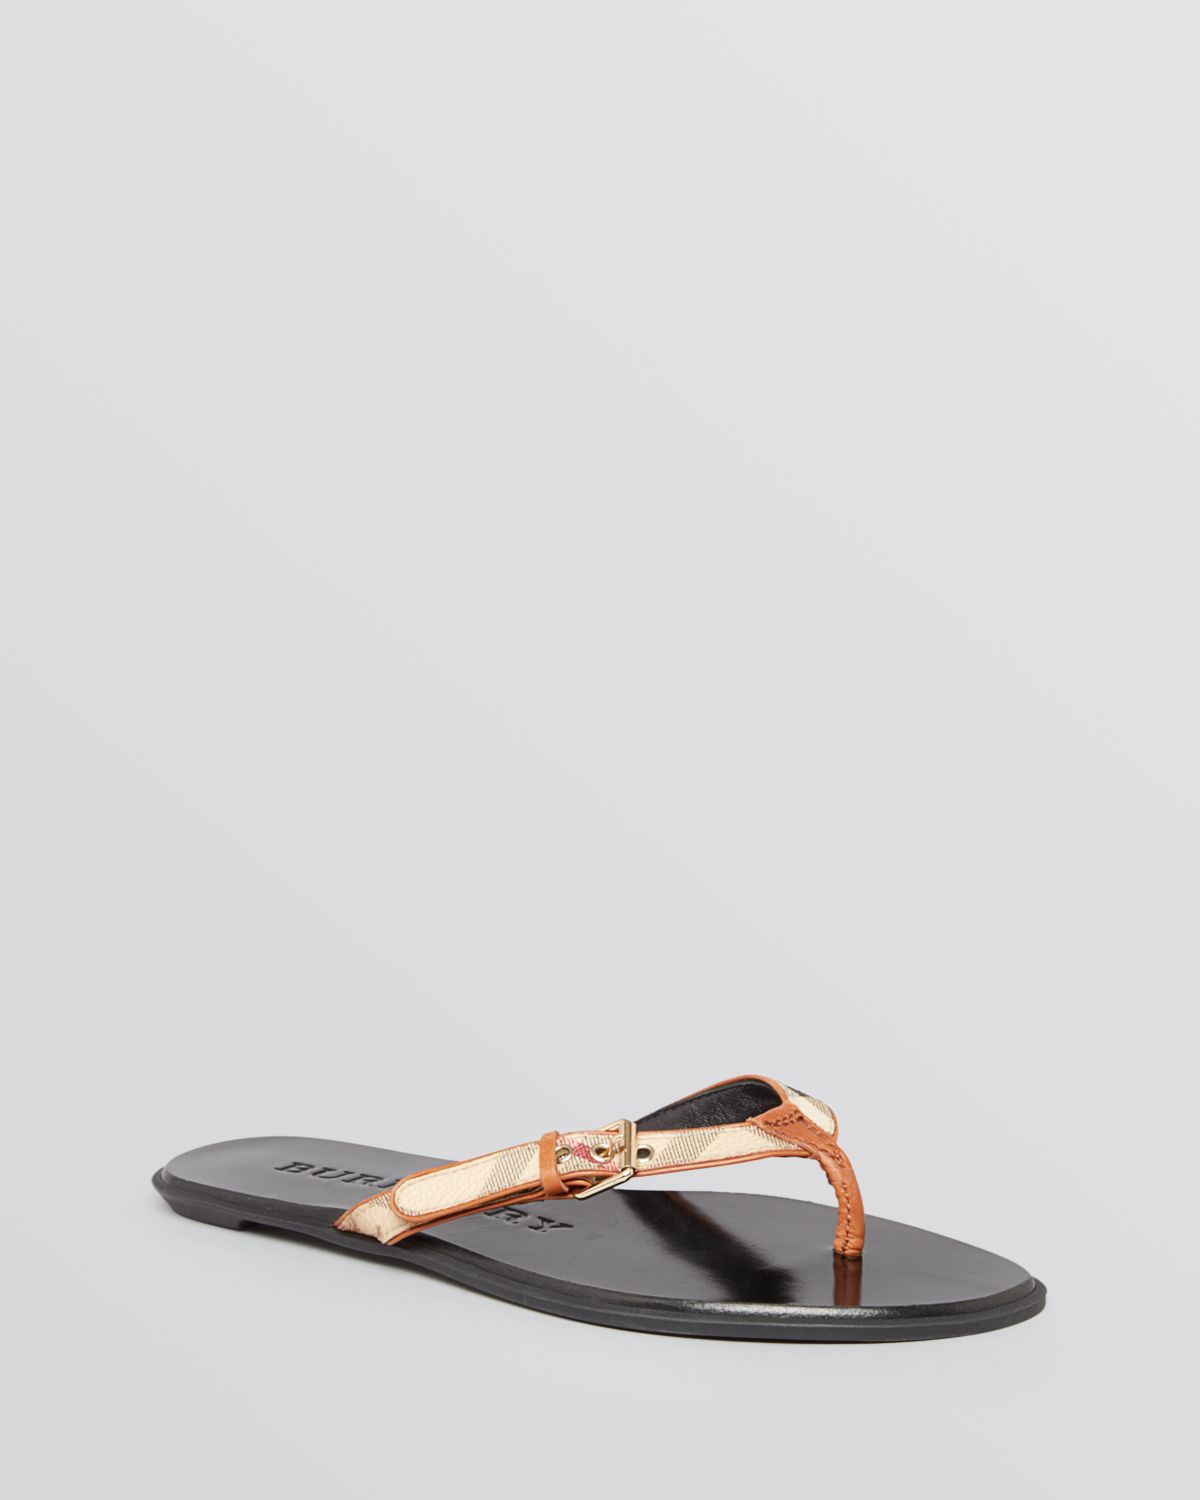 Summer Essentials: Burberry Parsons Check Thong Sandals in Size 37